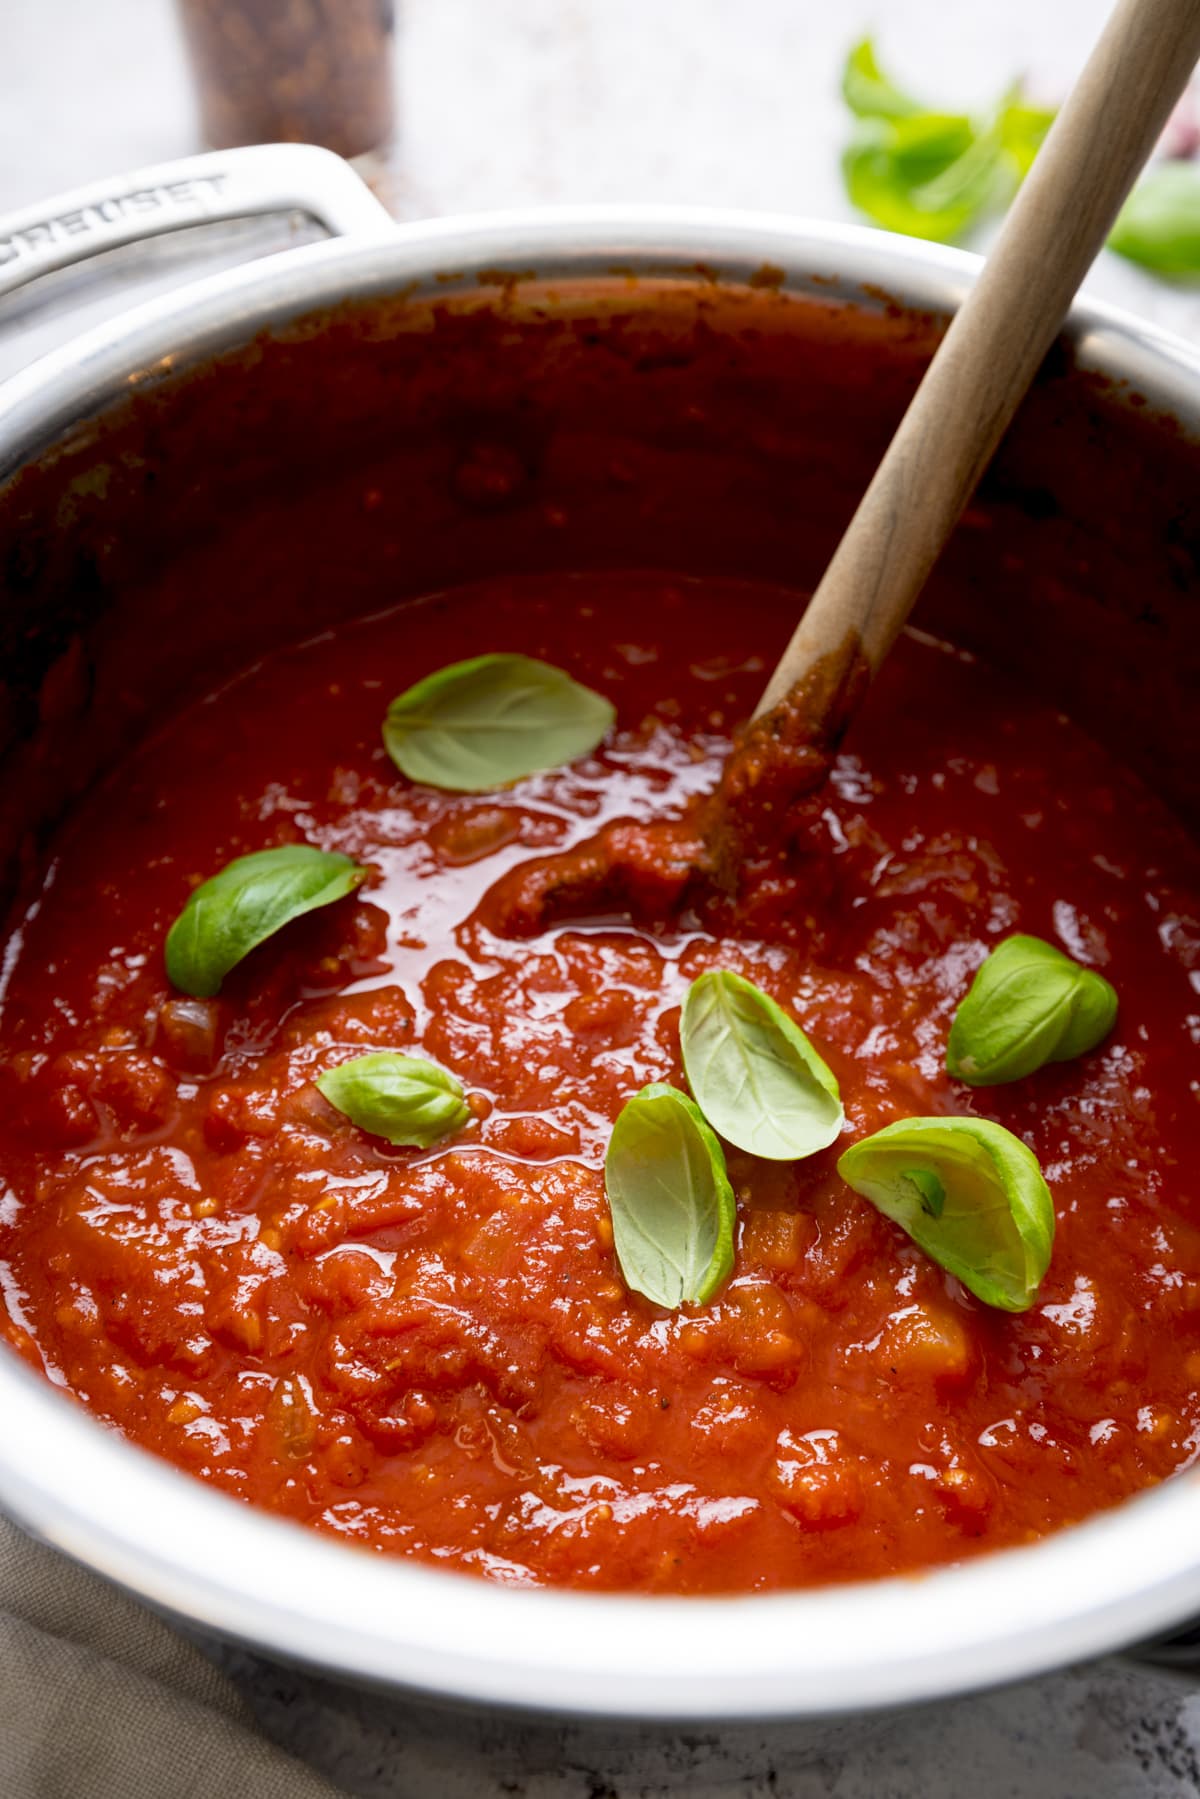 Close up image of a silver pan filled with arrabbiata sauce on a light background. There is a wooden spoon and sprinkled fresh basil leaves in the sauce.